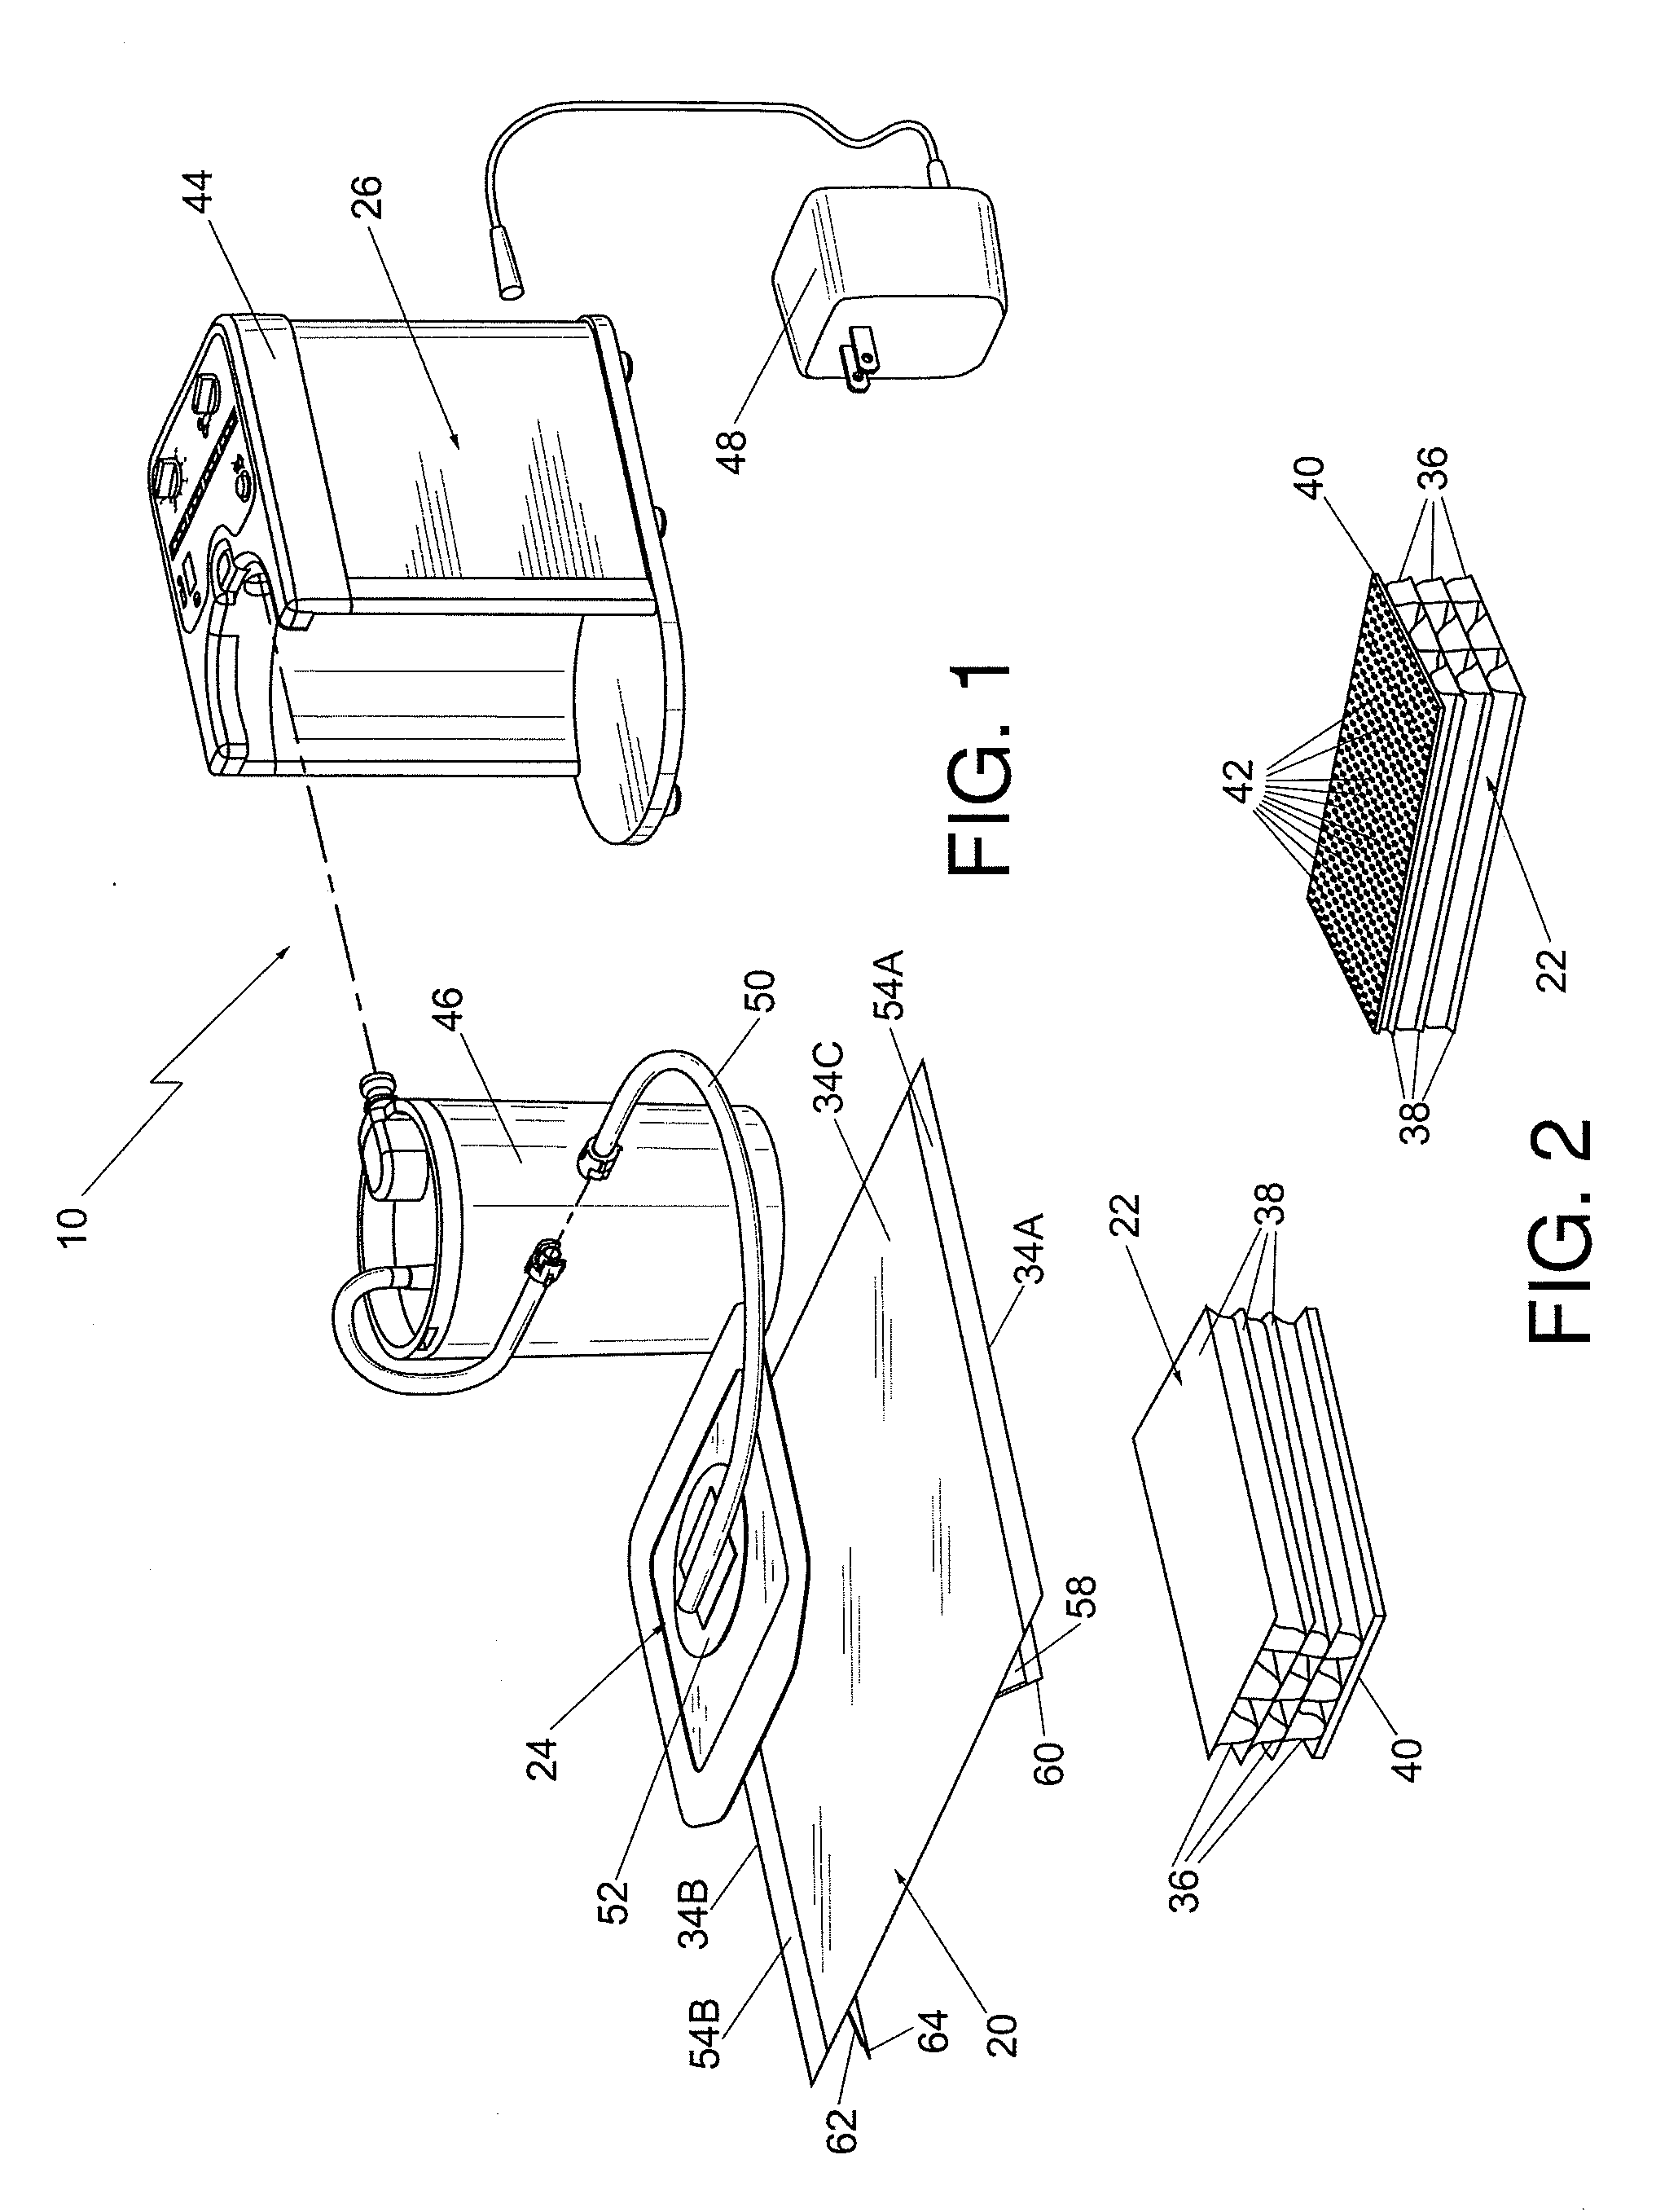 Thin film wound cover, suction assisted wound treatment system using the same, method of using the thin film wound cover and method of making the same